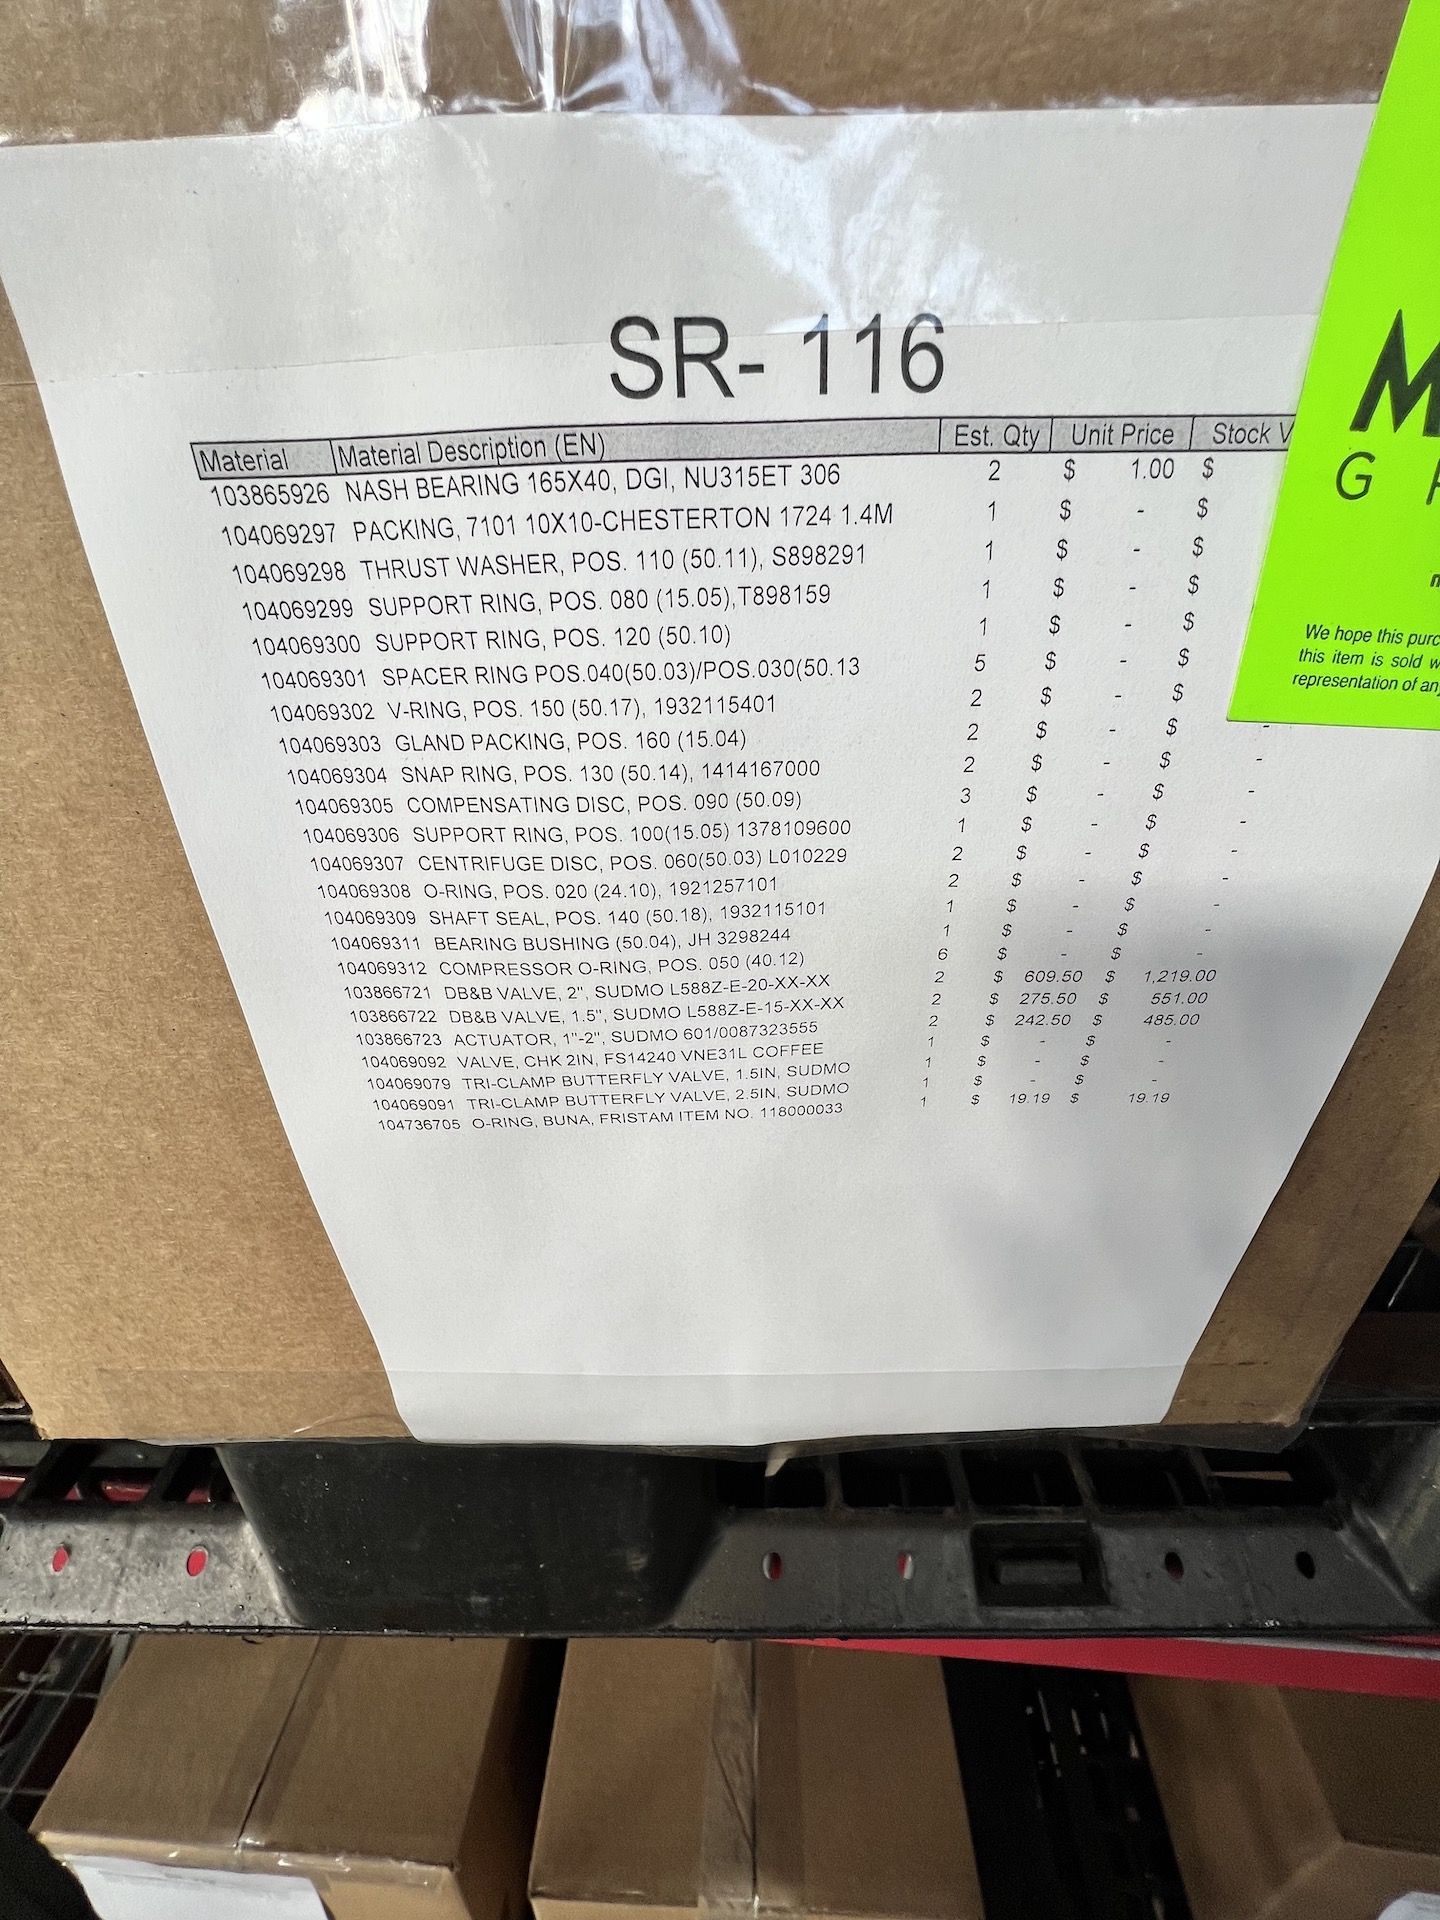 ASSORTED MRO AND SPARE PARTS, PLEASE SEE INVENTORY LISTS IN PHOTOS - Image 11 of 15